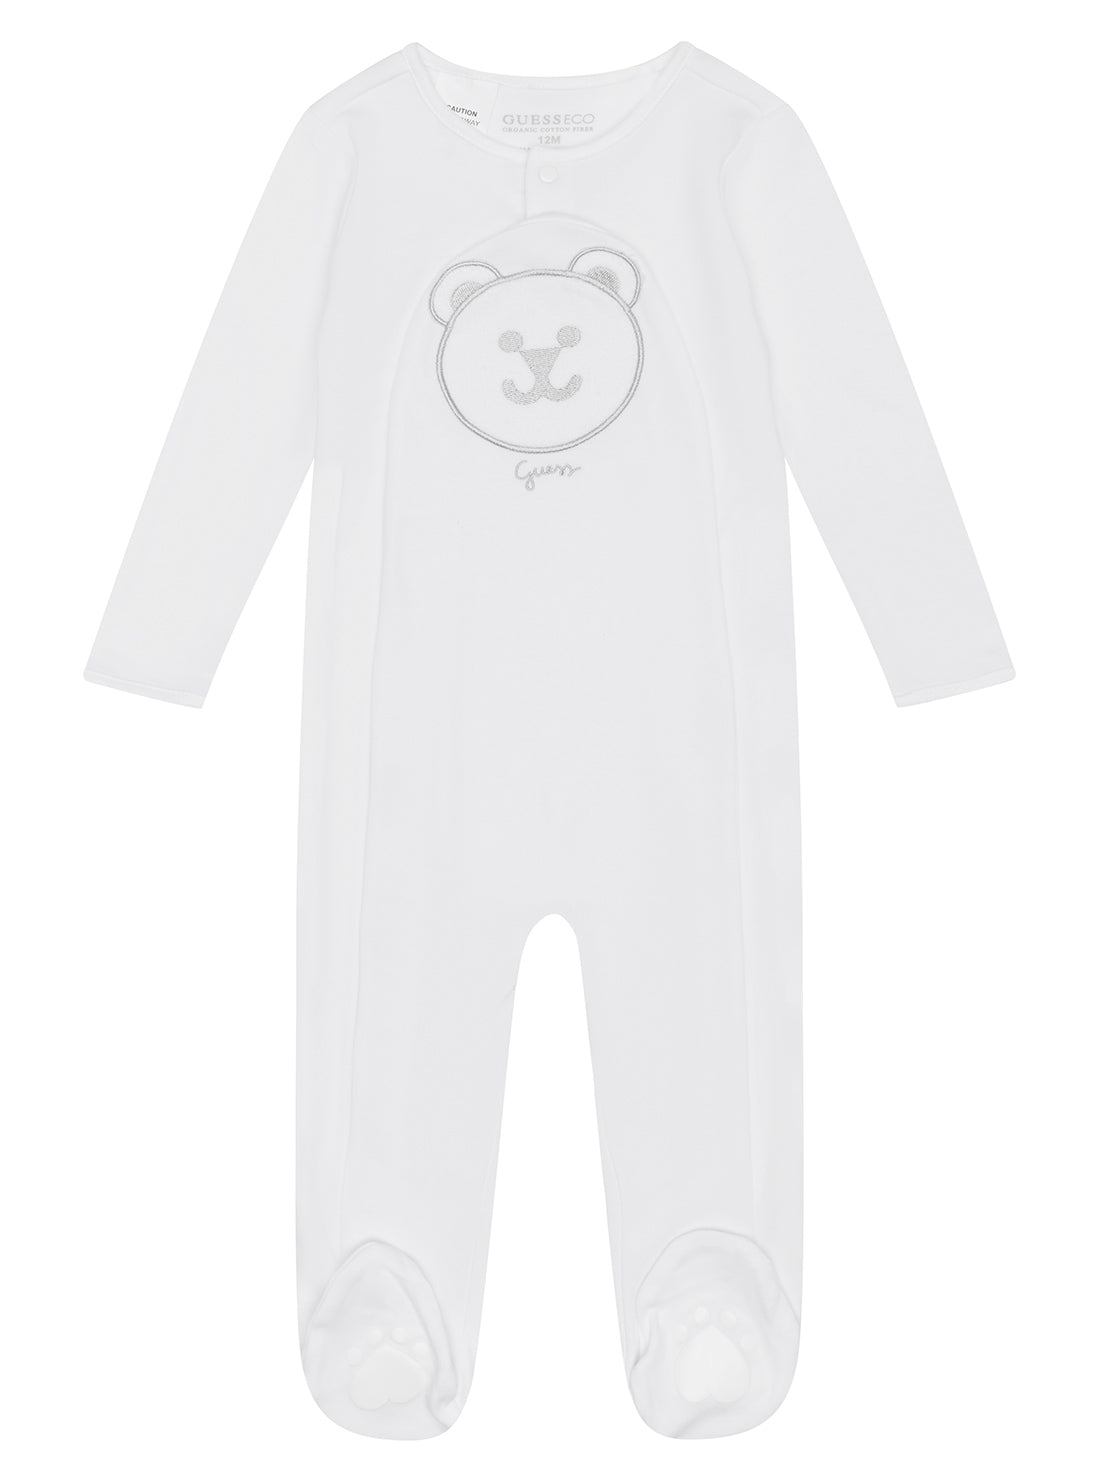 GUESS White Interlock Overall (0-12M) front view